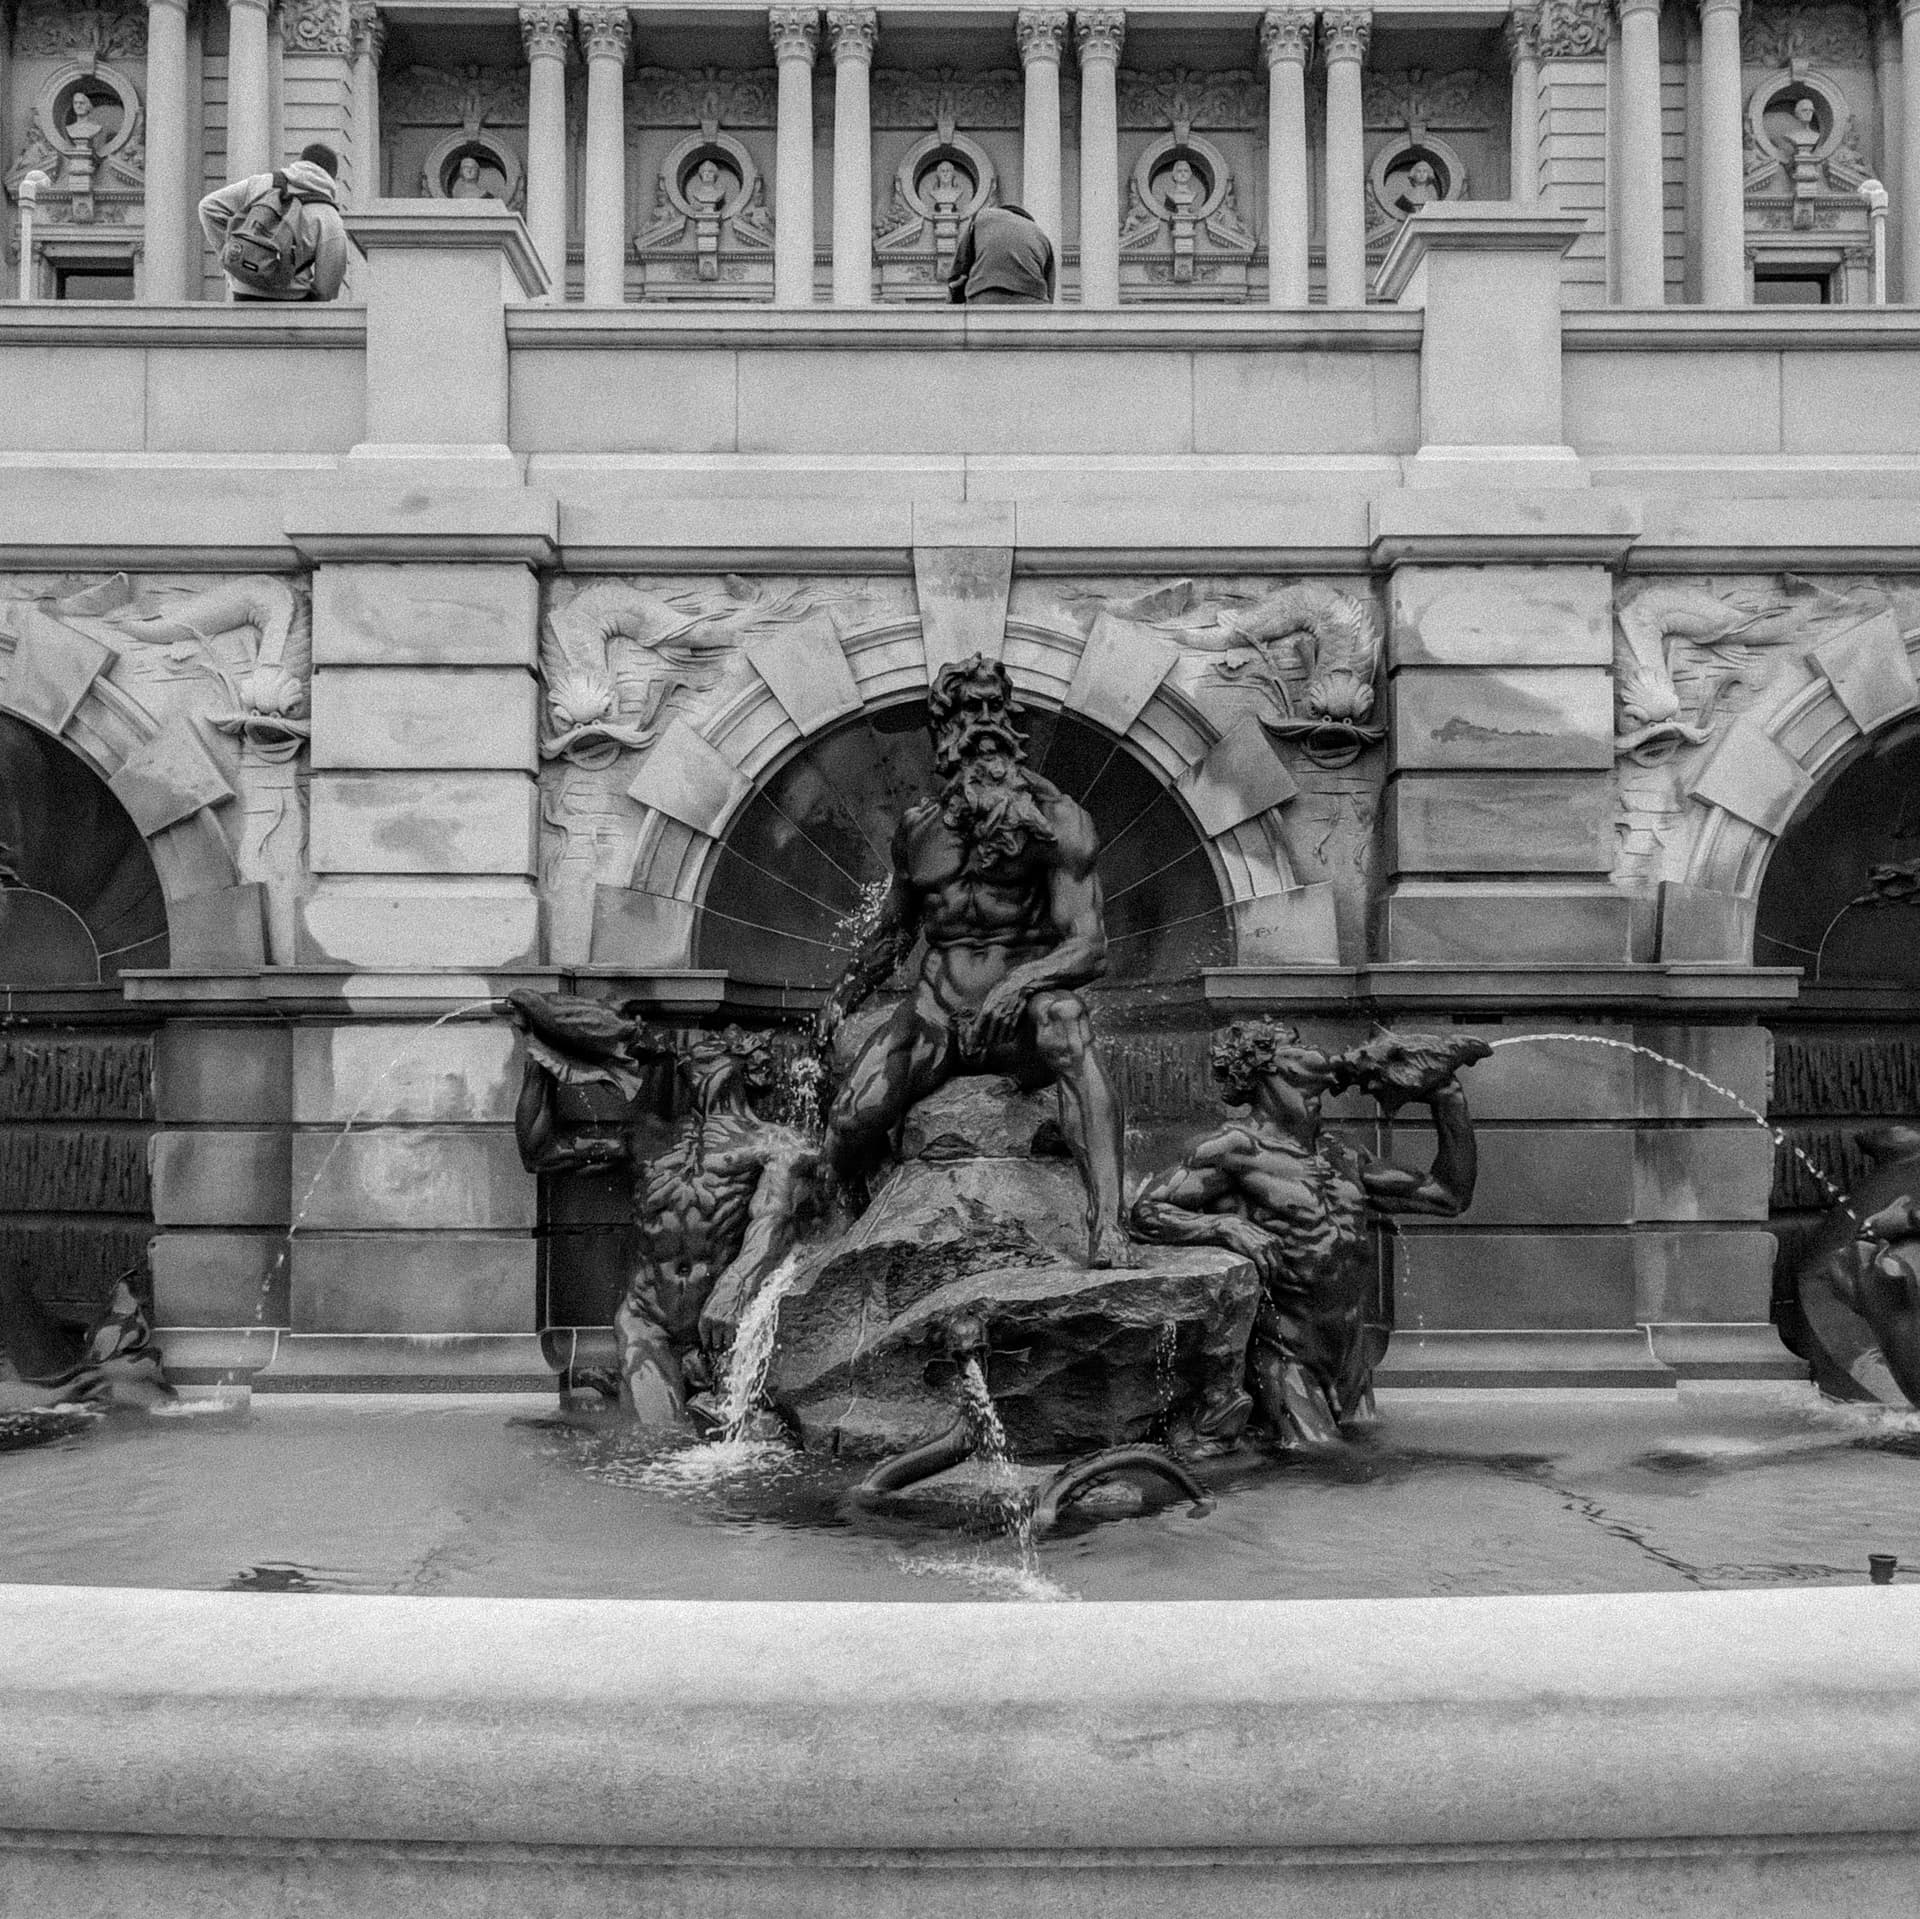 The fountain in front of the Library of Congress' original building.